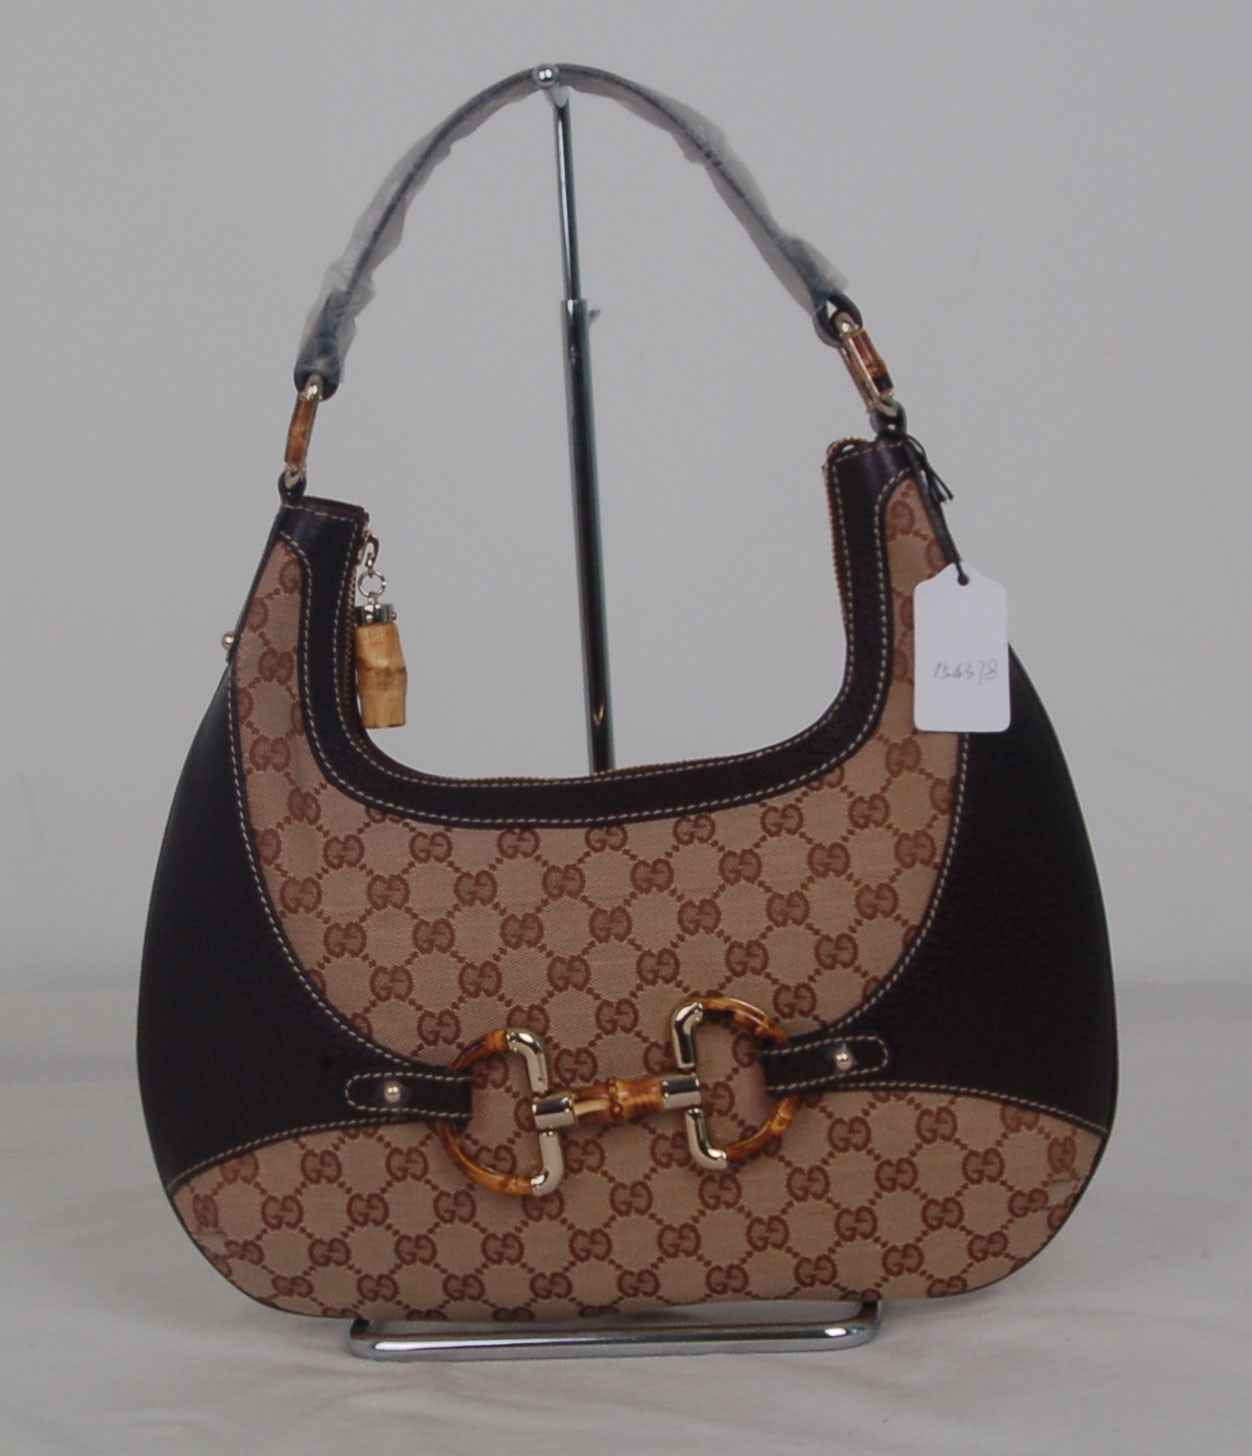 Gucci Latest Handbags Collection For 2010 - 11 - 0